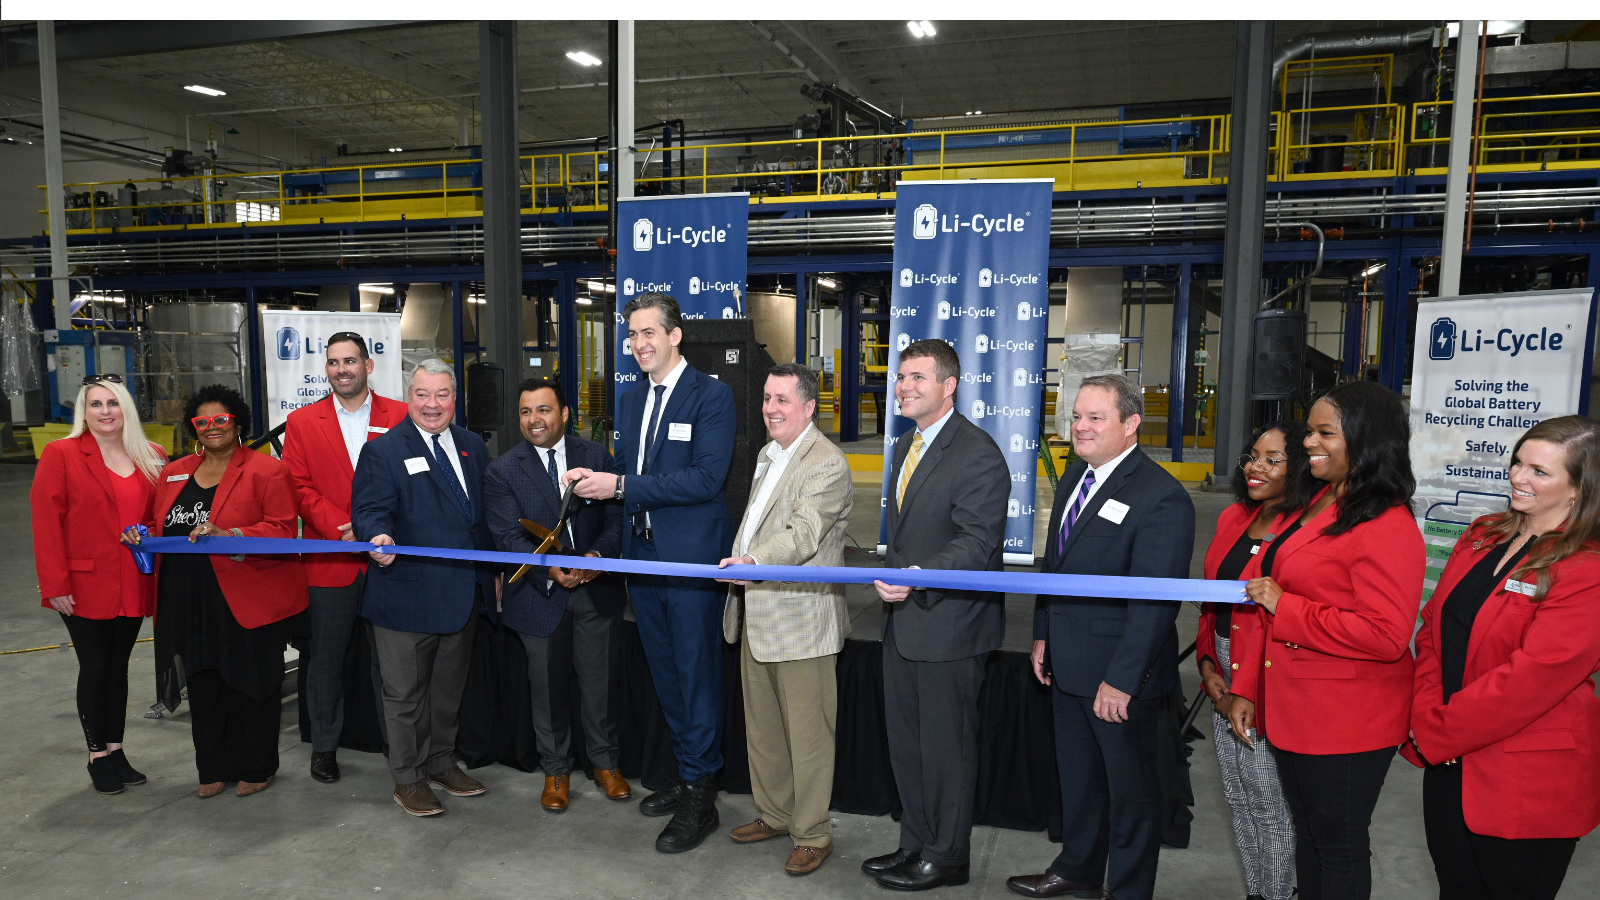 Group photo of a ribbon cutting ceremony in an industrial building.